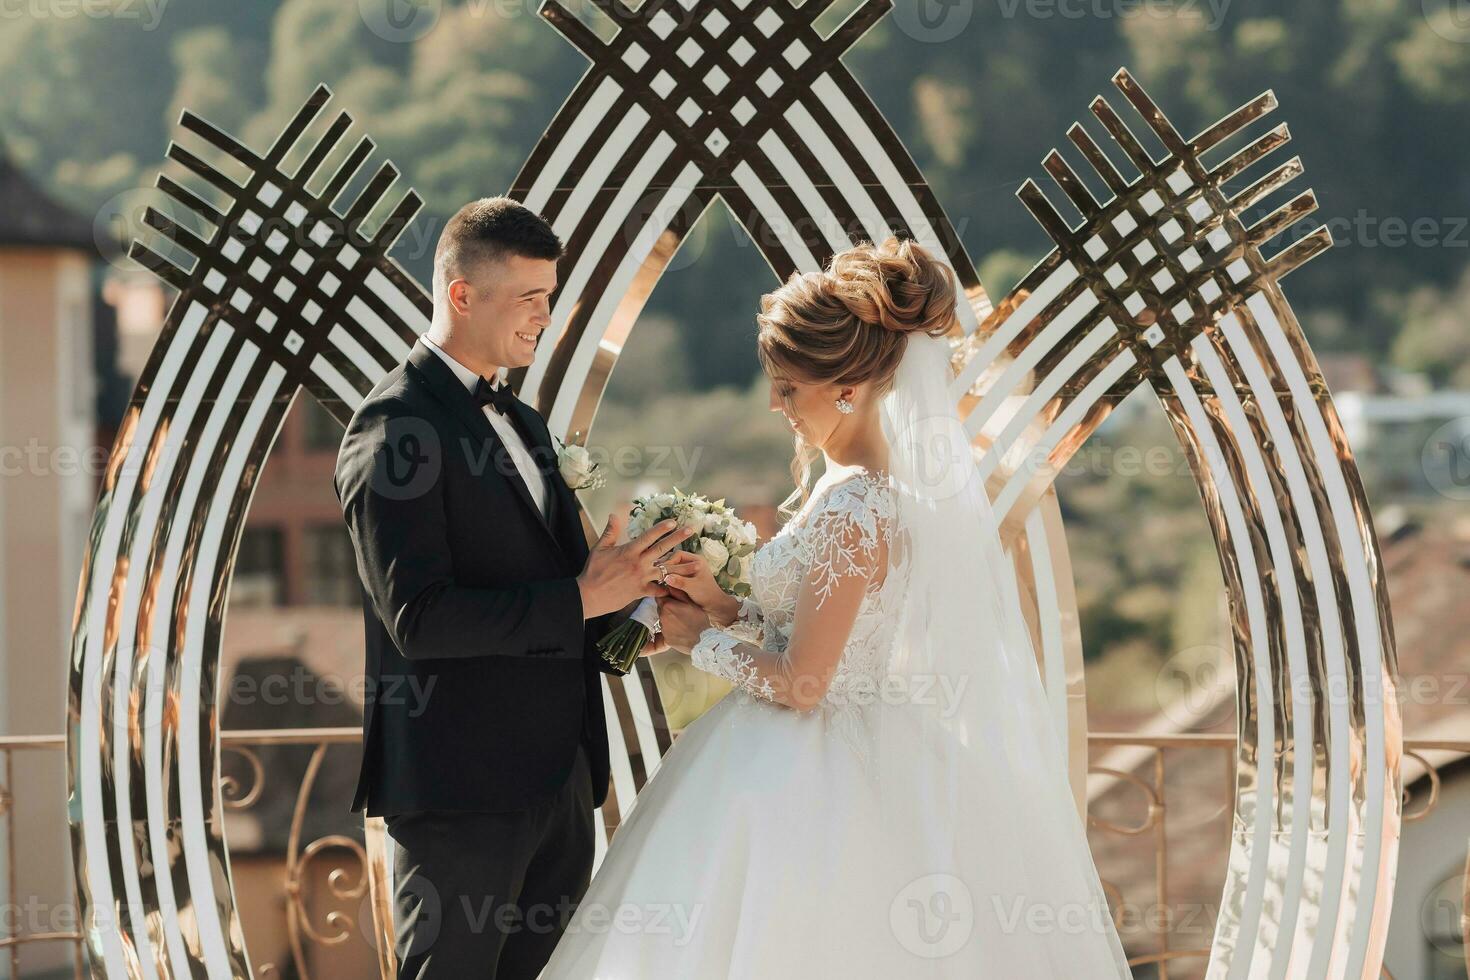 Wedding Portrait. Wedding ceremony painting in nature. The groom holds a bouquet and looks at the bride, the bride puts on the groom's wedding ring. Beautiful golden arch and fresh flowers photo